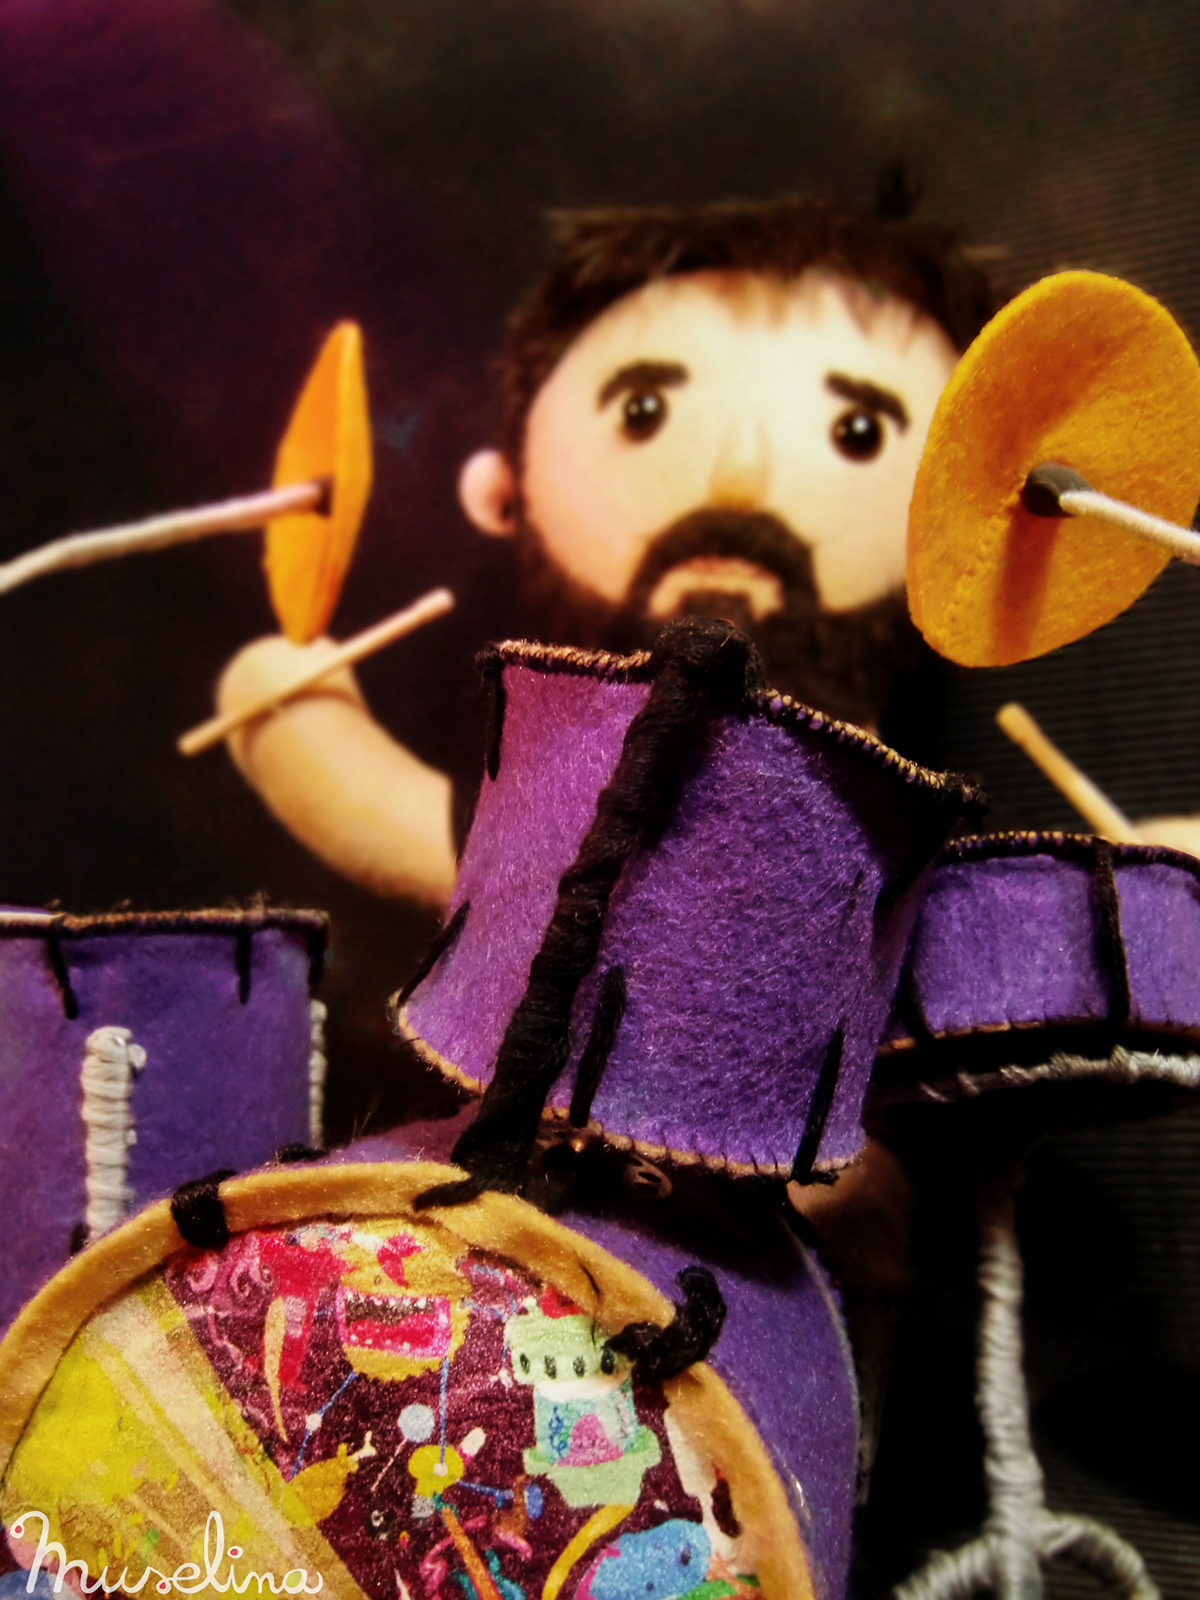 toys Custom doll Character drums drummer craft handmade made-to-order personalizado muñecos creative cute